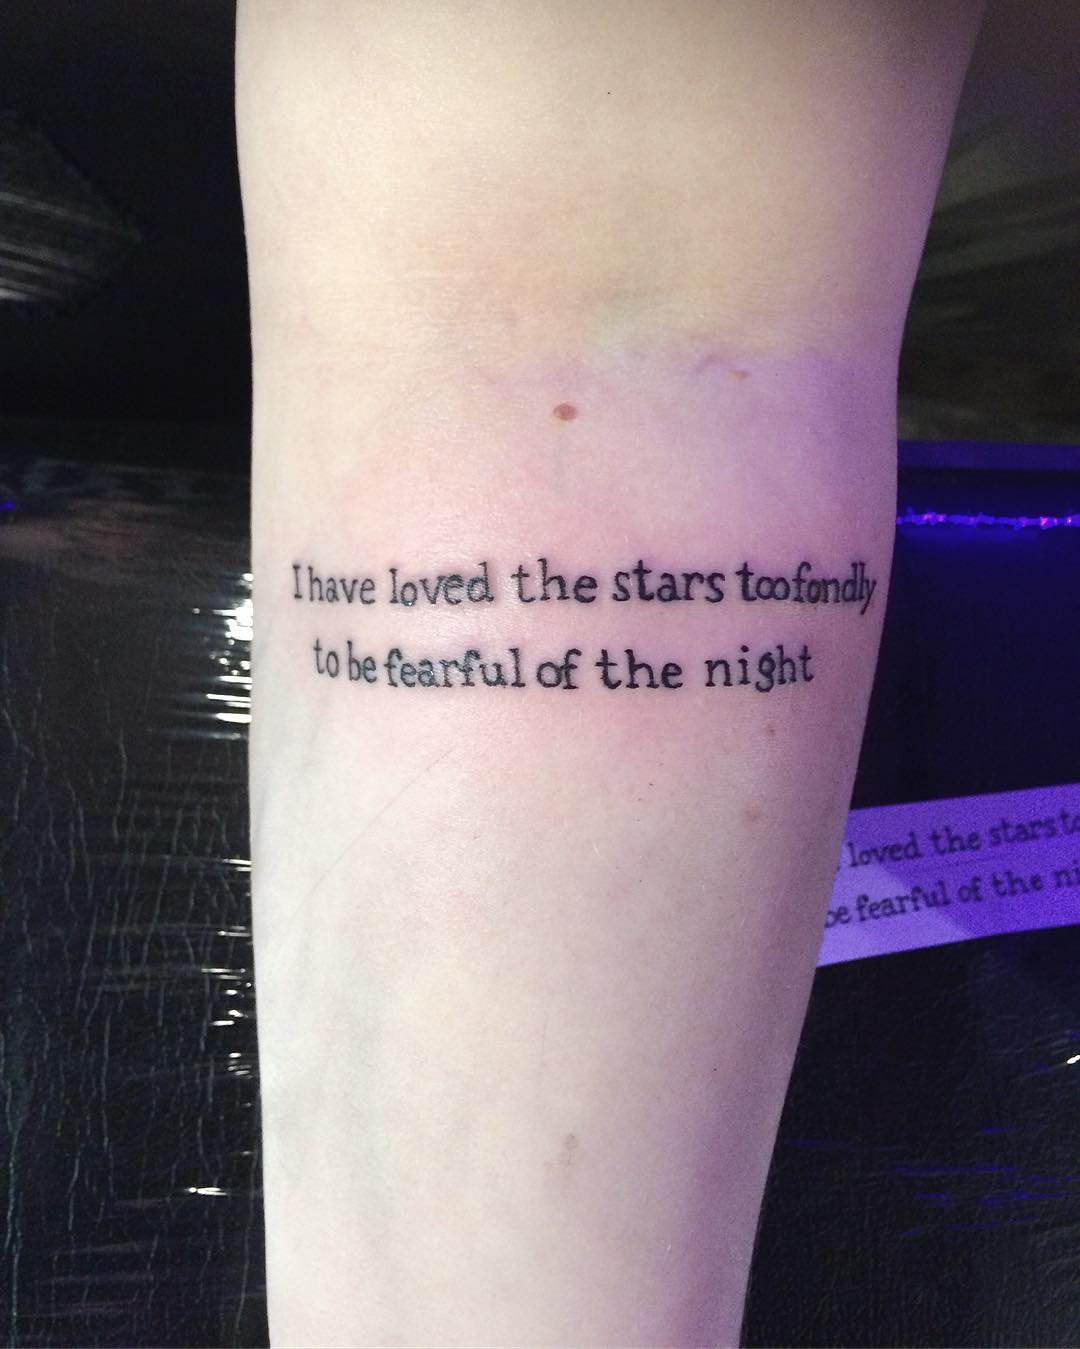 13 Meaningful Tattoo Ideas For Poetry Lovers That Will Literary Stay With  You Forever  Poetry tattoo Poem tattoo Meaningful tattoos